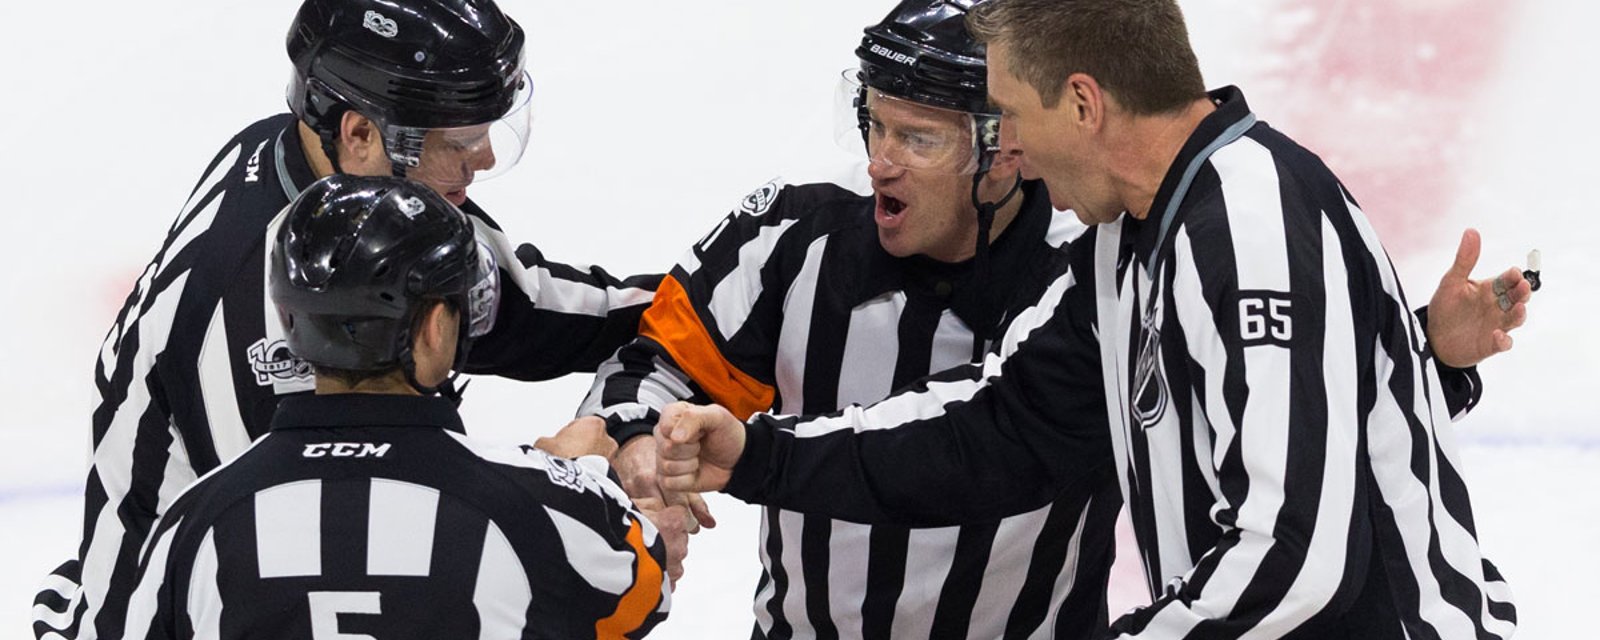 Referees' decision leaves NHL player feeling unsafe